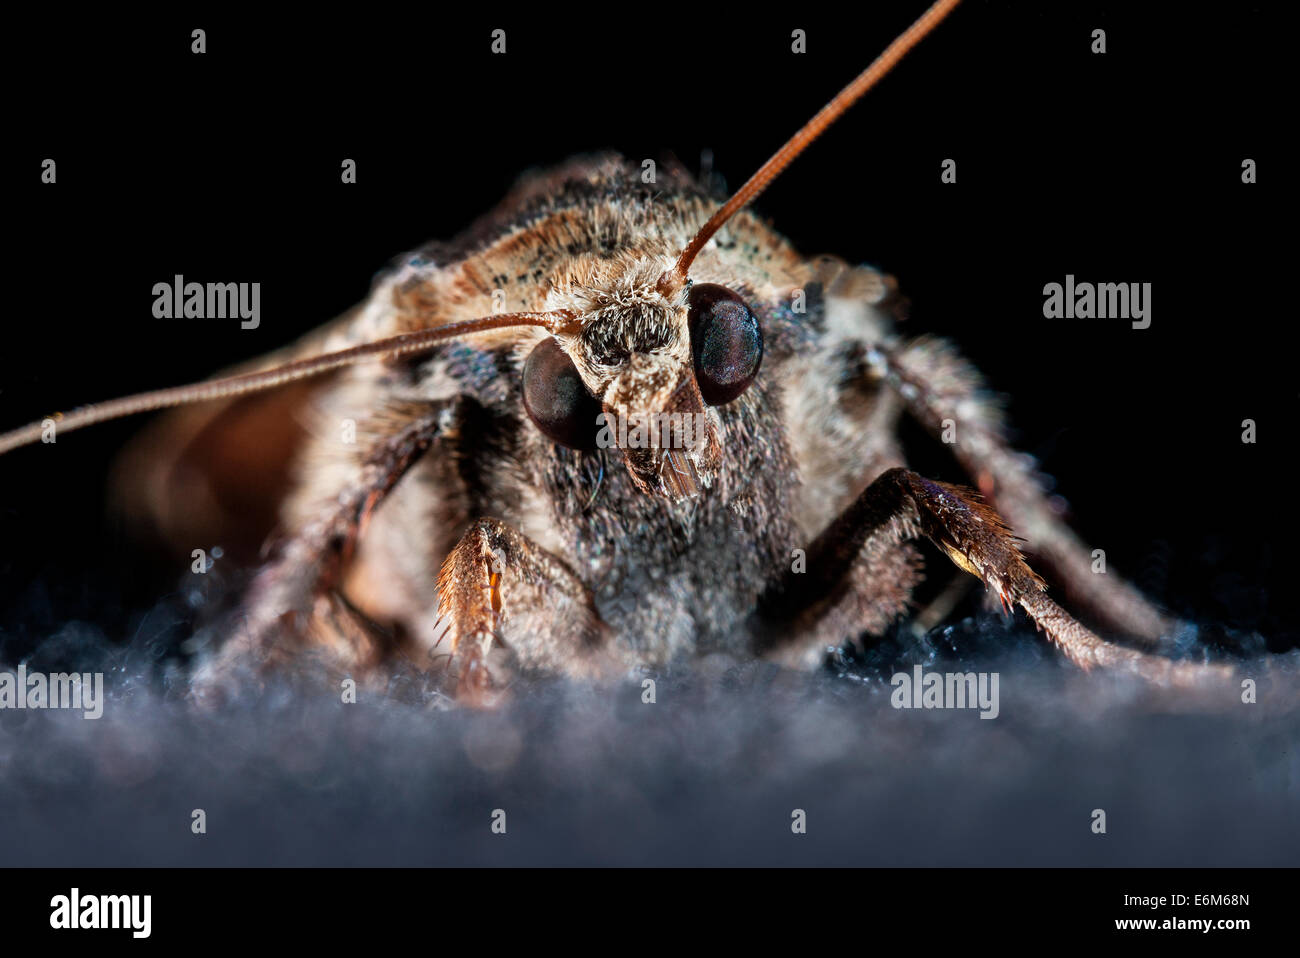 1,215 Anti Moth Images, Stock Photos, 3D objects, & Vectors